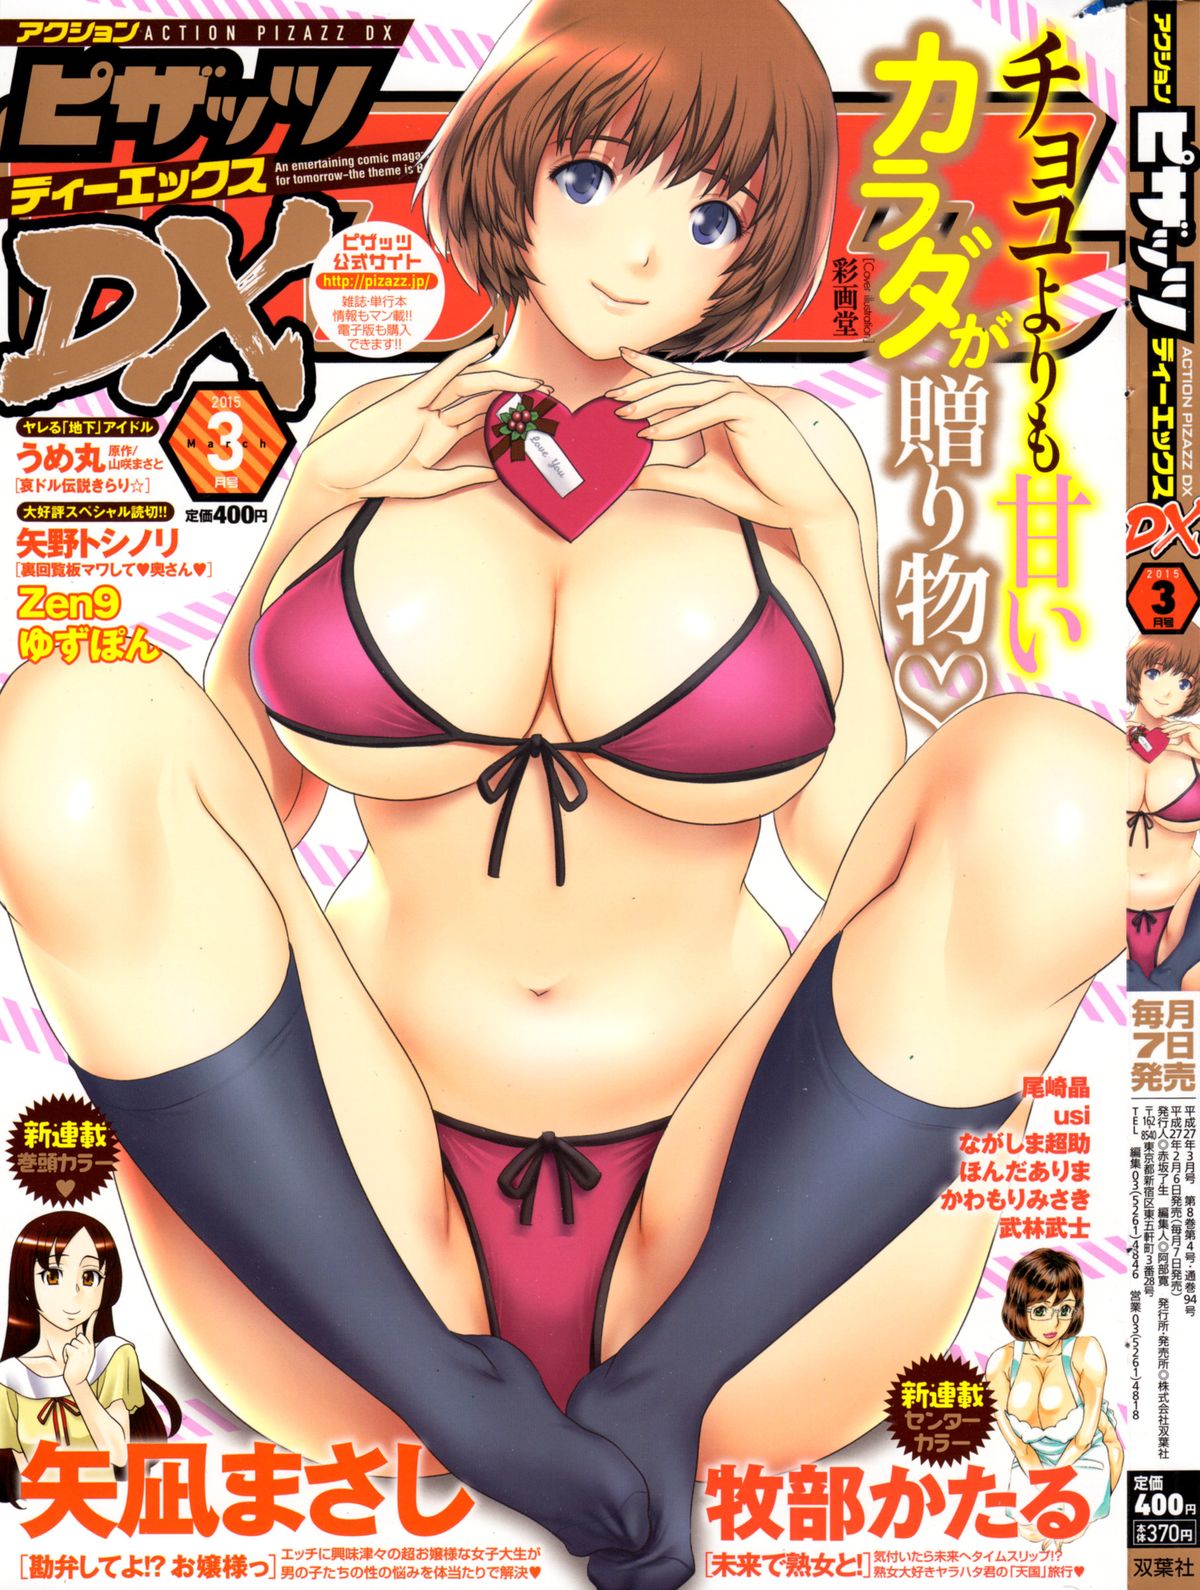 Action Pizazz DX 2015-03 page 1 full